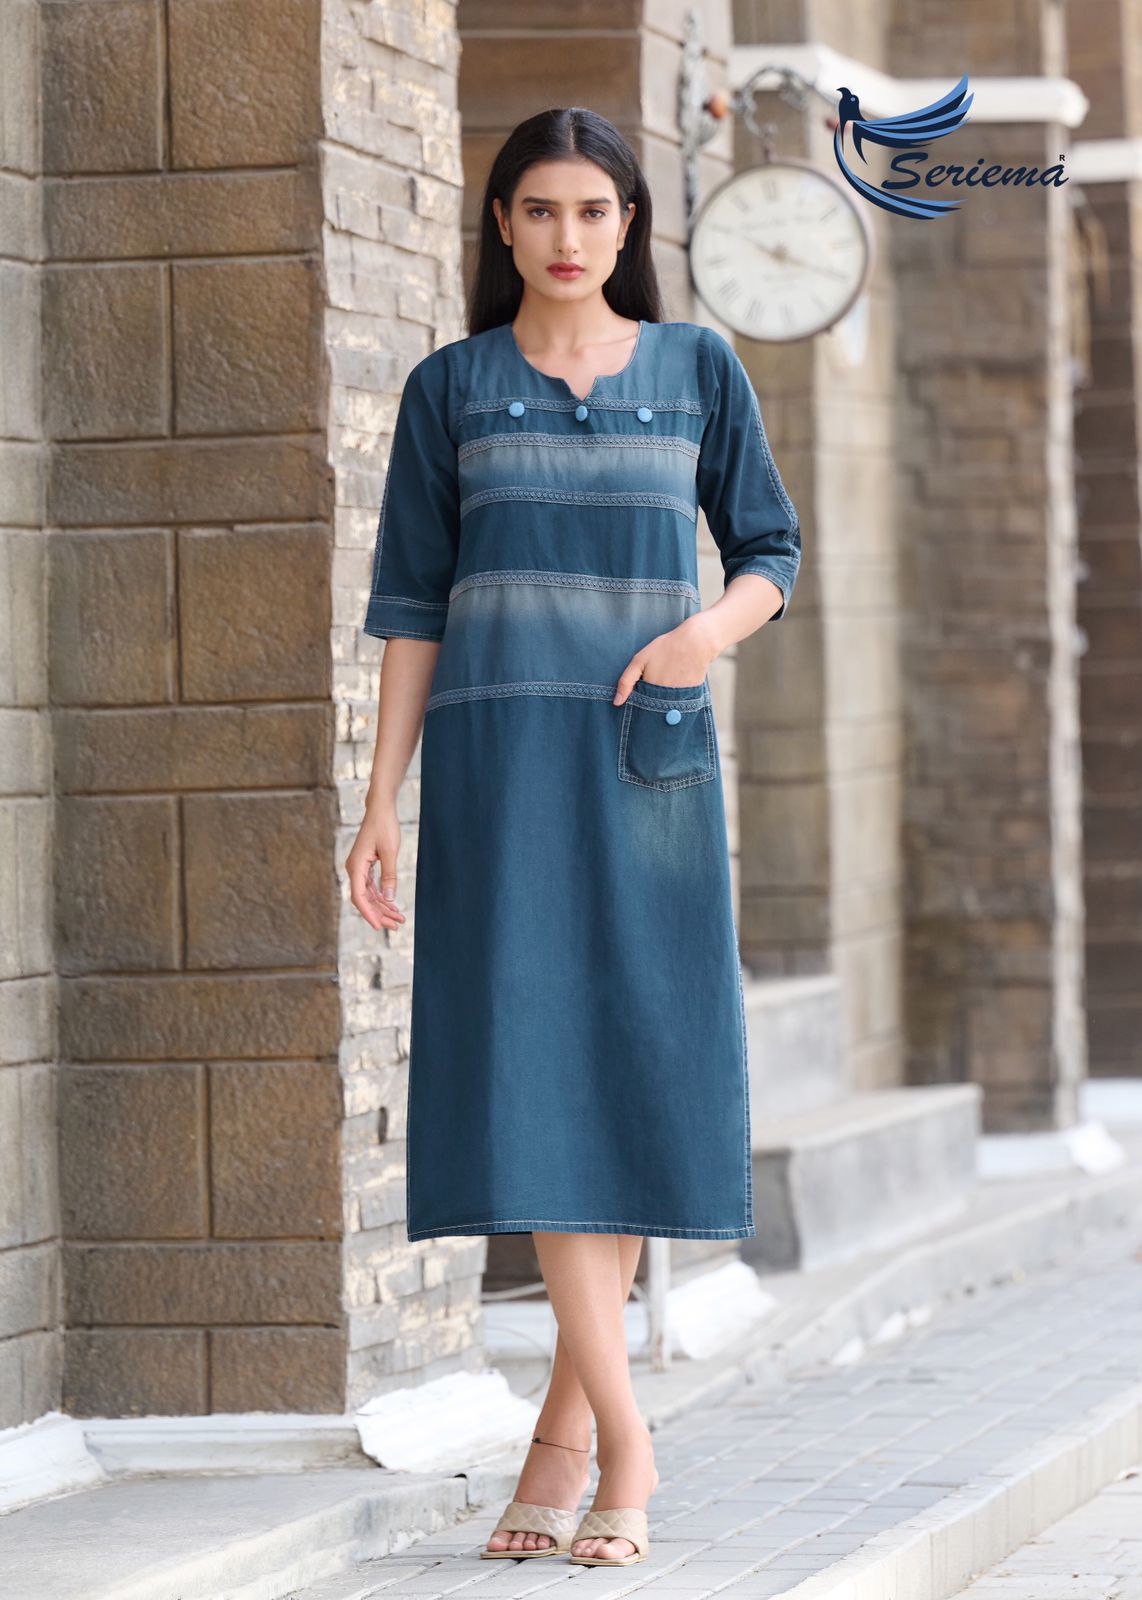 Buy Saree Exotica Blue Embroidery Straight Denim Kurti Online at Low prices  in India on Winsant, India fastest online shopping web… | Mode, Desain kurti,  Mode india